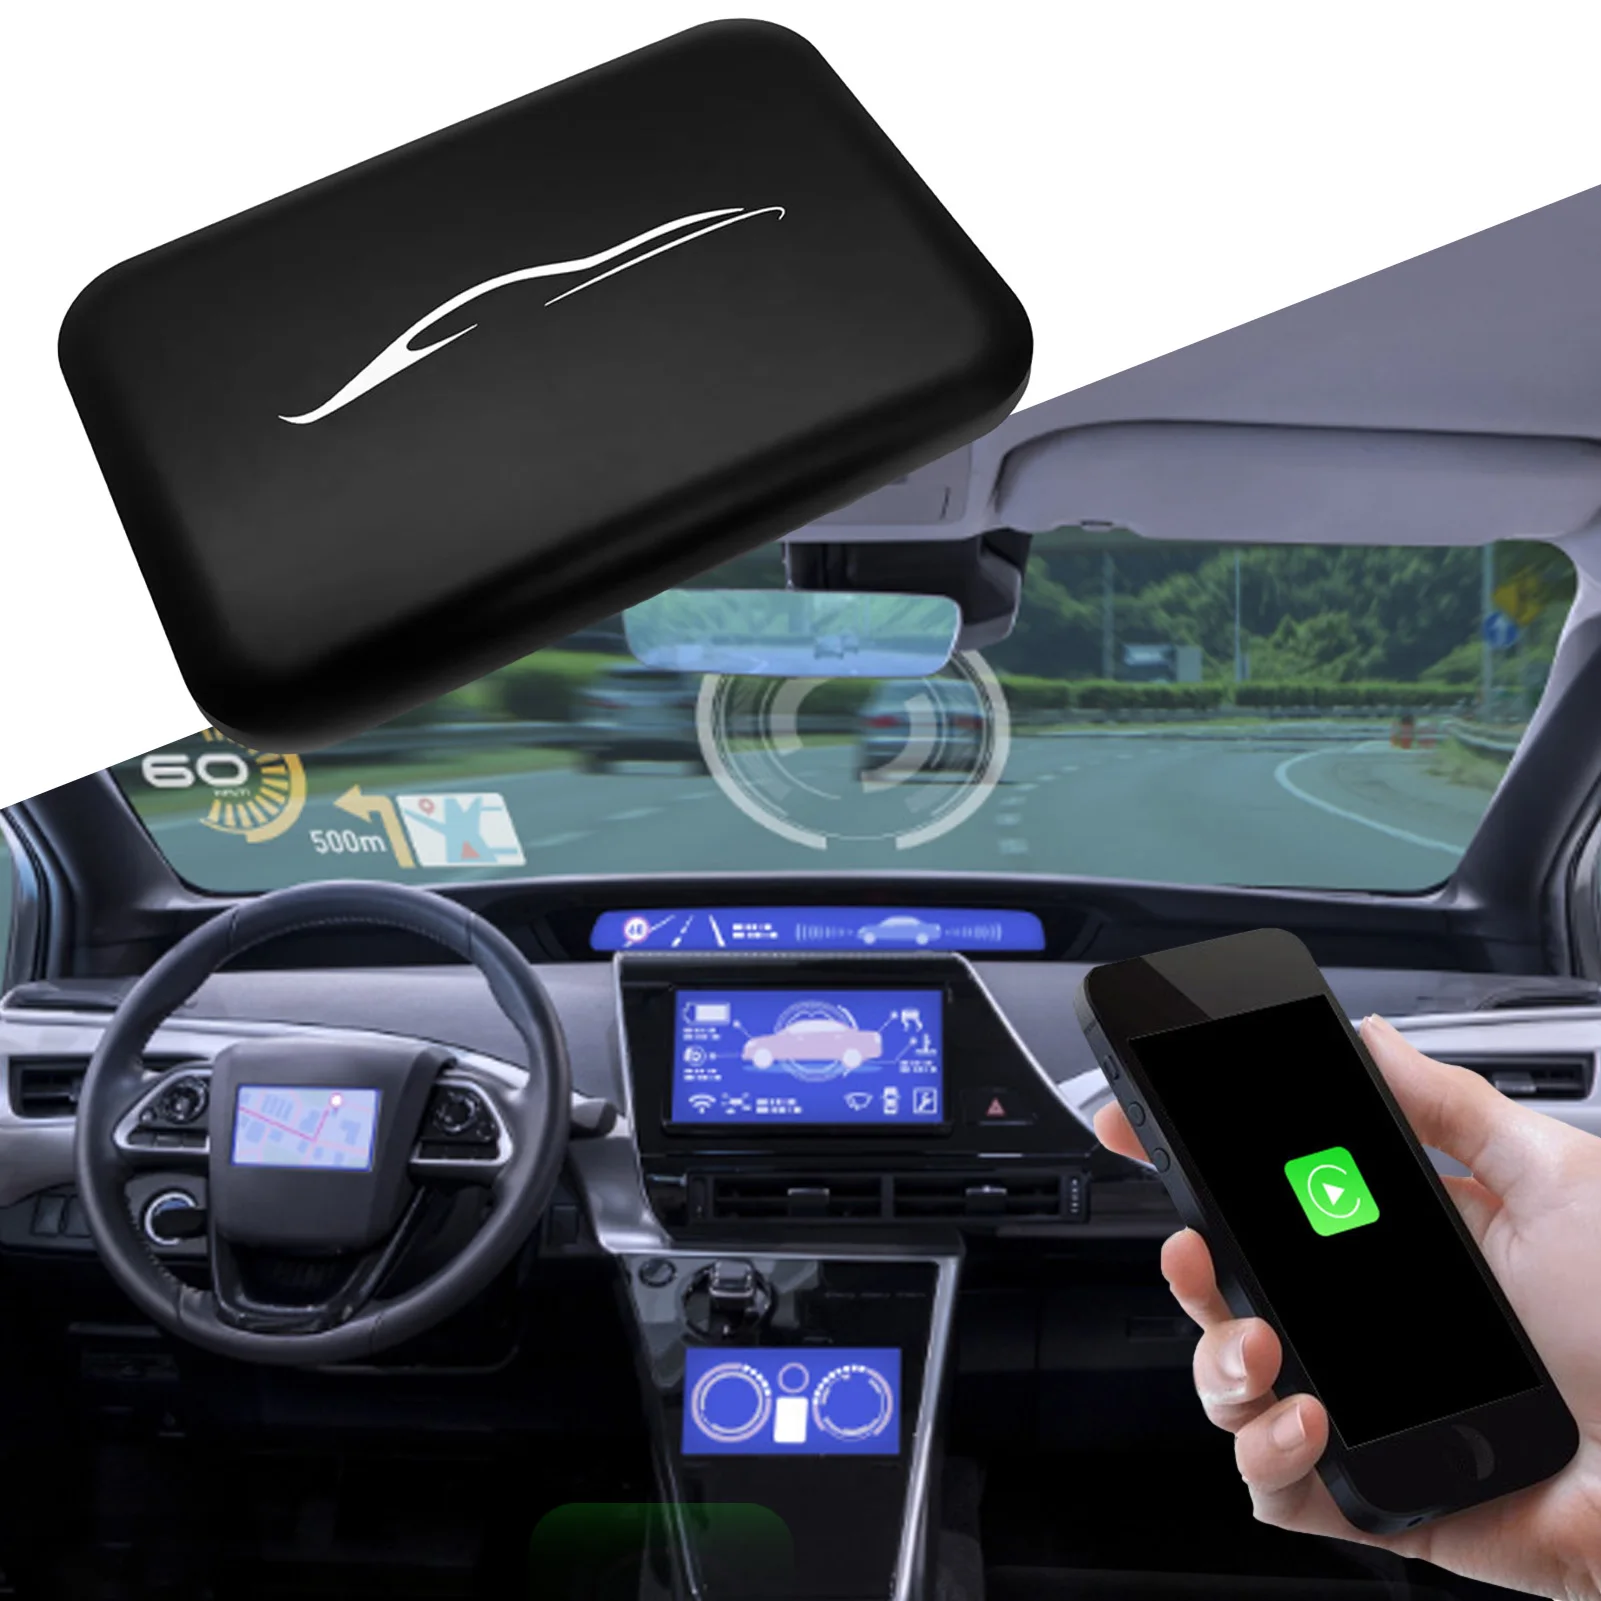 

Original Car Wired to Wireless Carpaly Module Navigation USB Portable Lightweight Wireless Auto Connection Charging Box Player